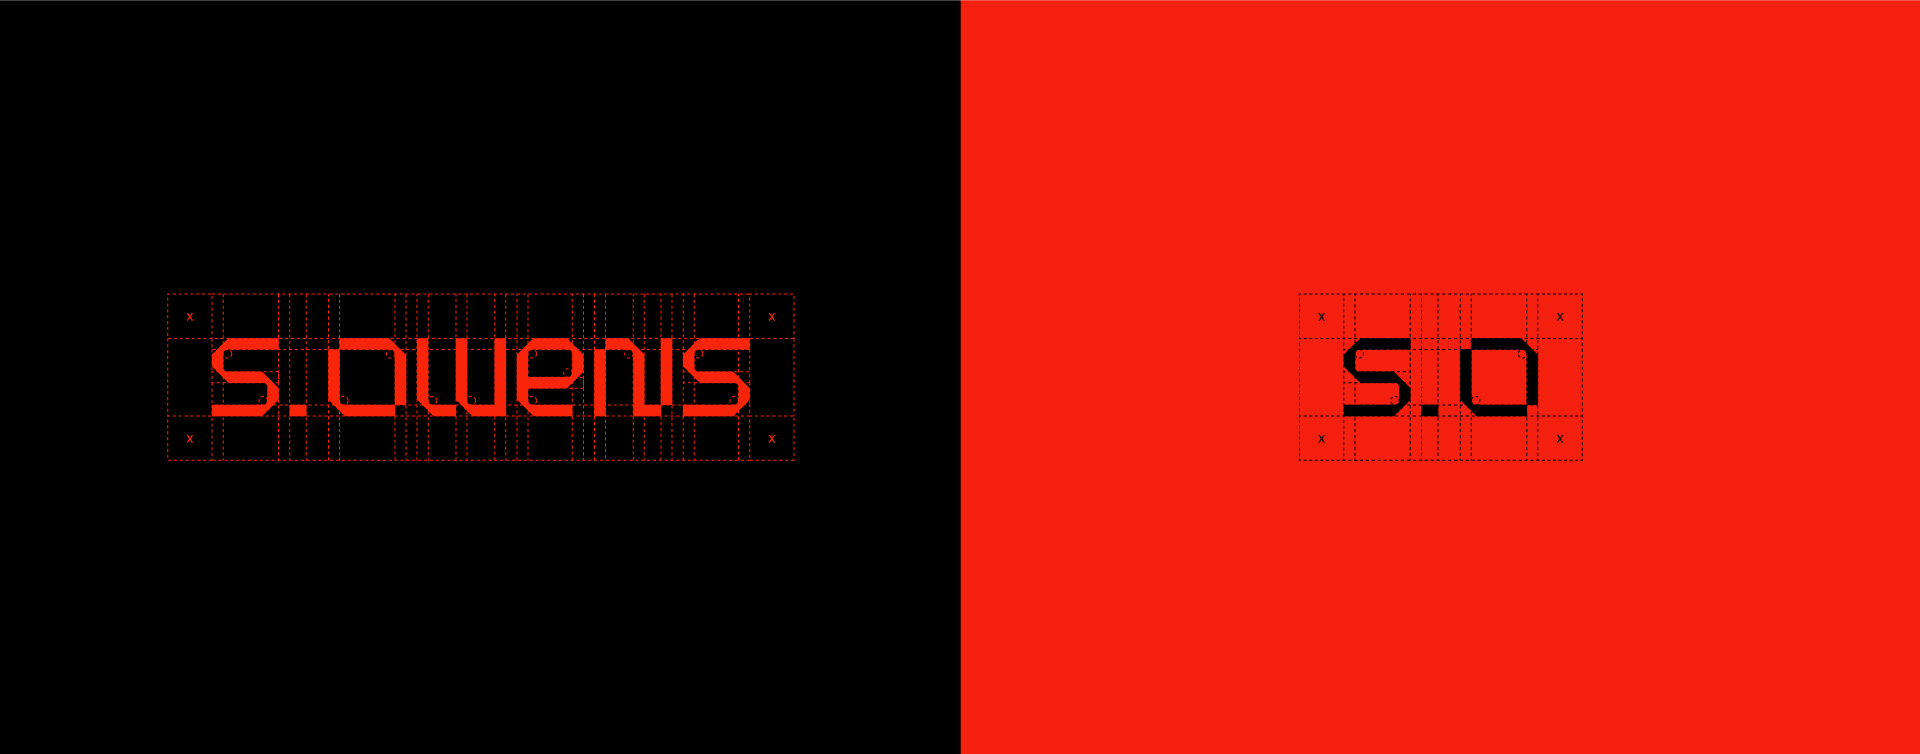 Brid Was Entrusted to Create a Logo, and Visual Identity for S.owens